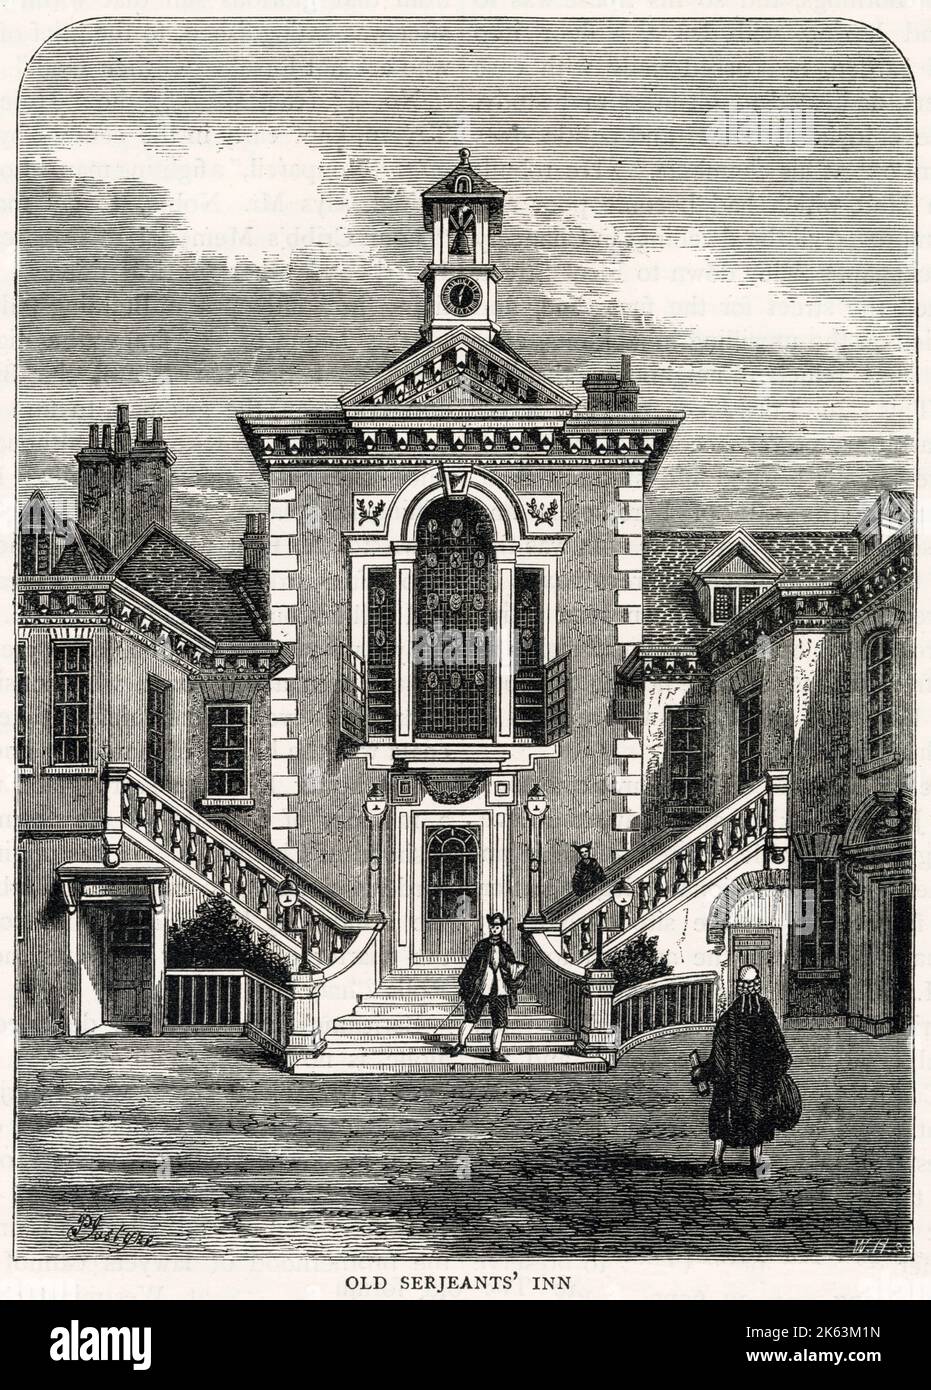 Old Serjeant's Inn, off Chancery Lane, London. Formerly the Inn of Court of the Serjeants-at-Law in London.     Date: 1800s Stock Photo